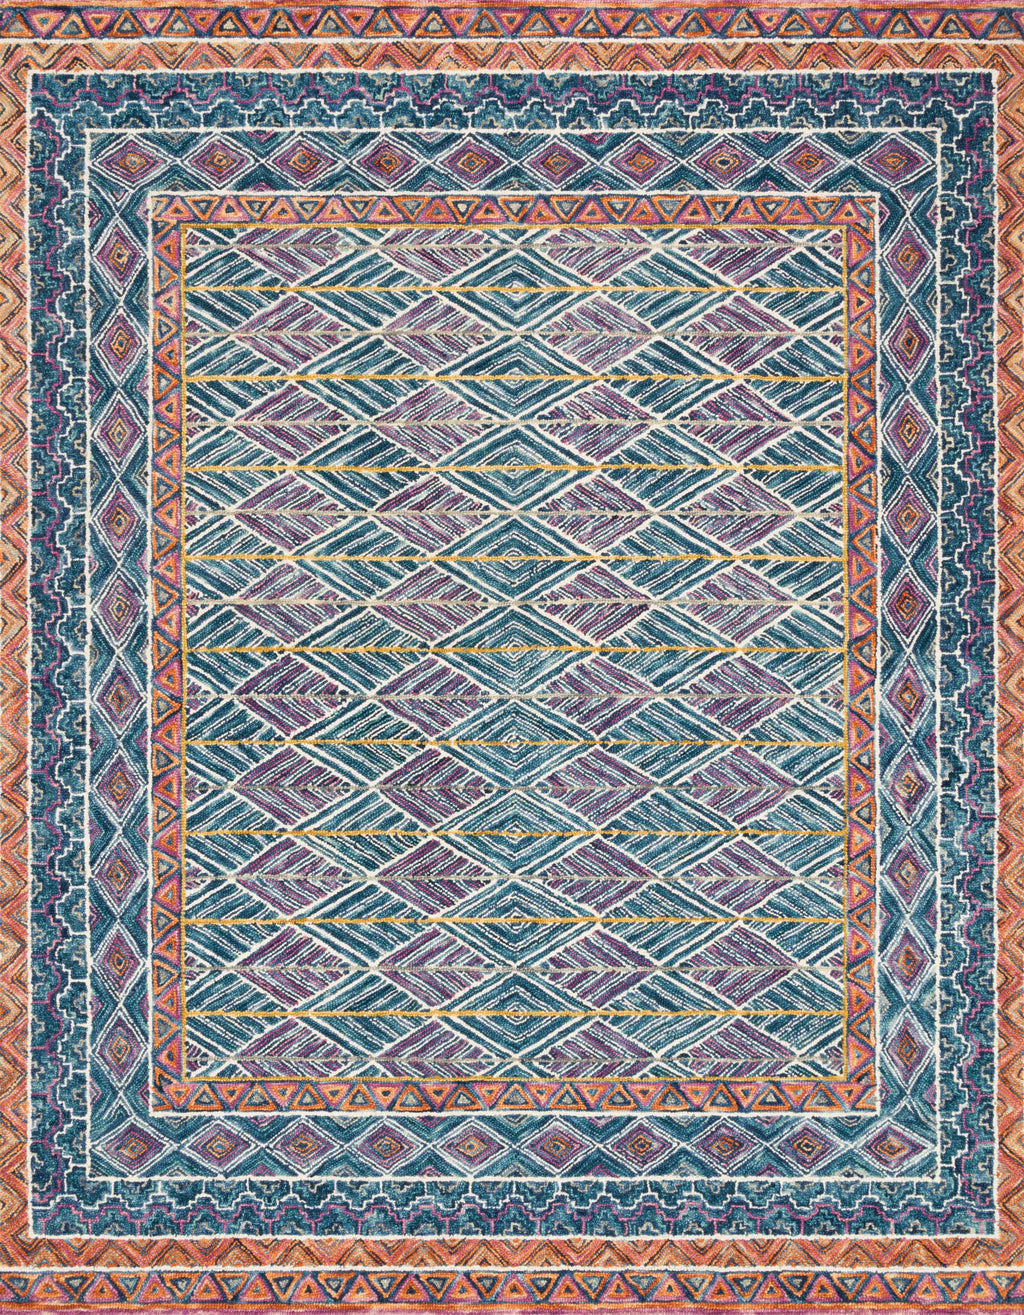 PRITI Collection Wool Rug  in  TEAL / FIESTA Blue Accent Hand-Hooked Wool